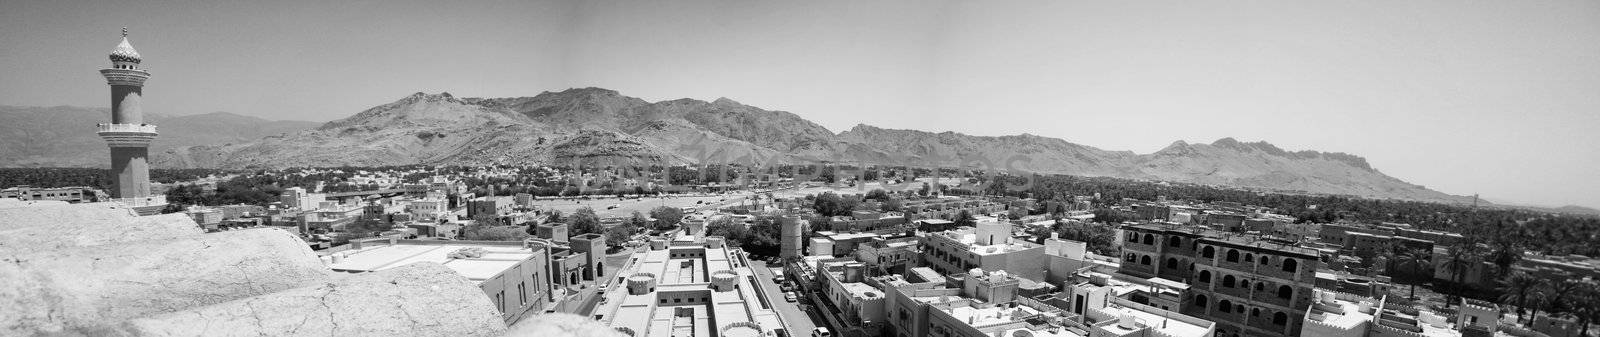 Architecture Detail of Nizwa, Oman, Middle East